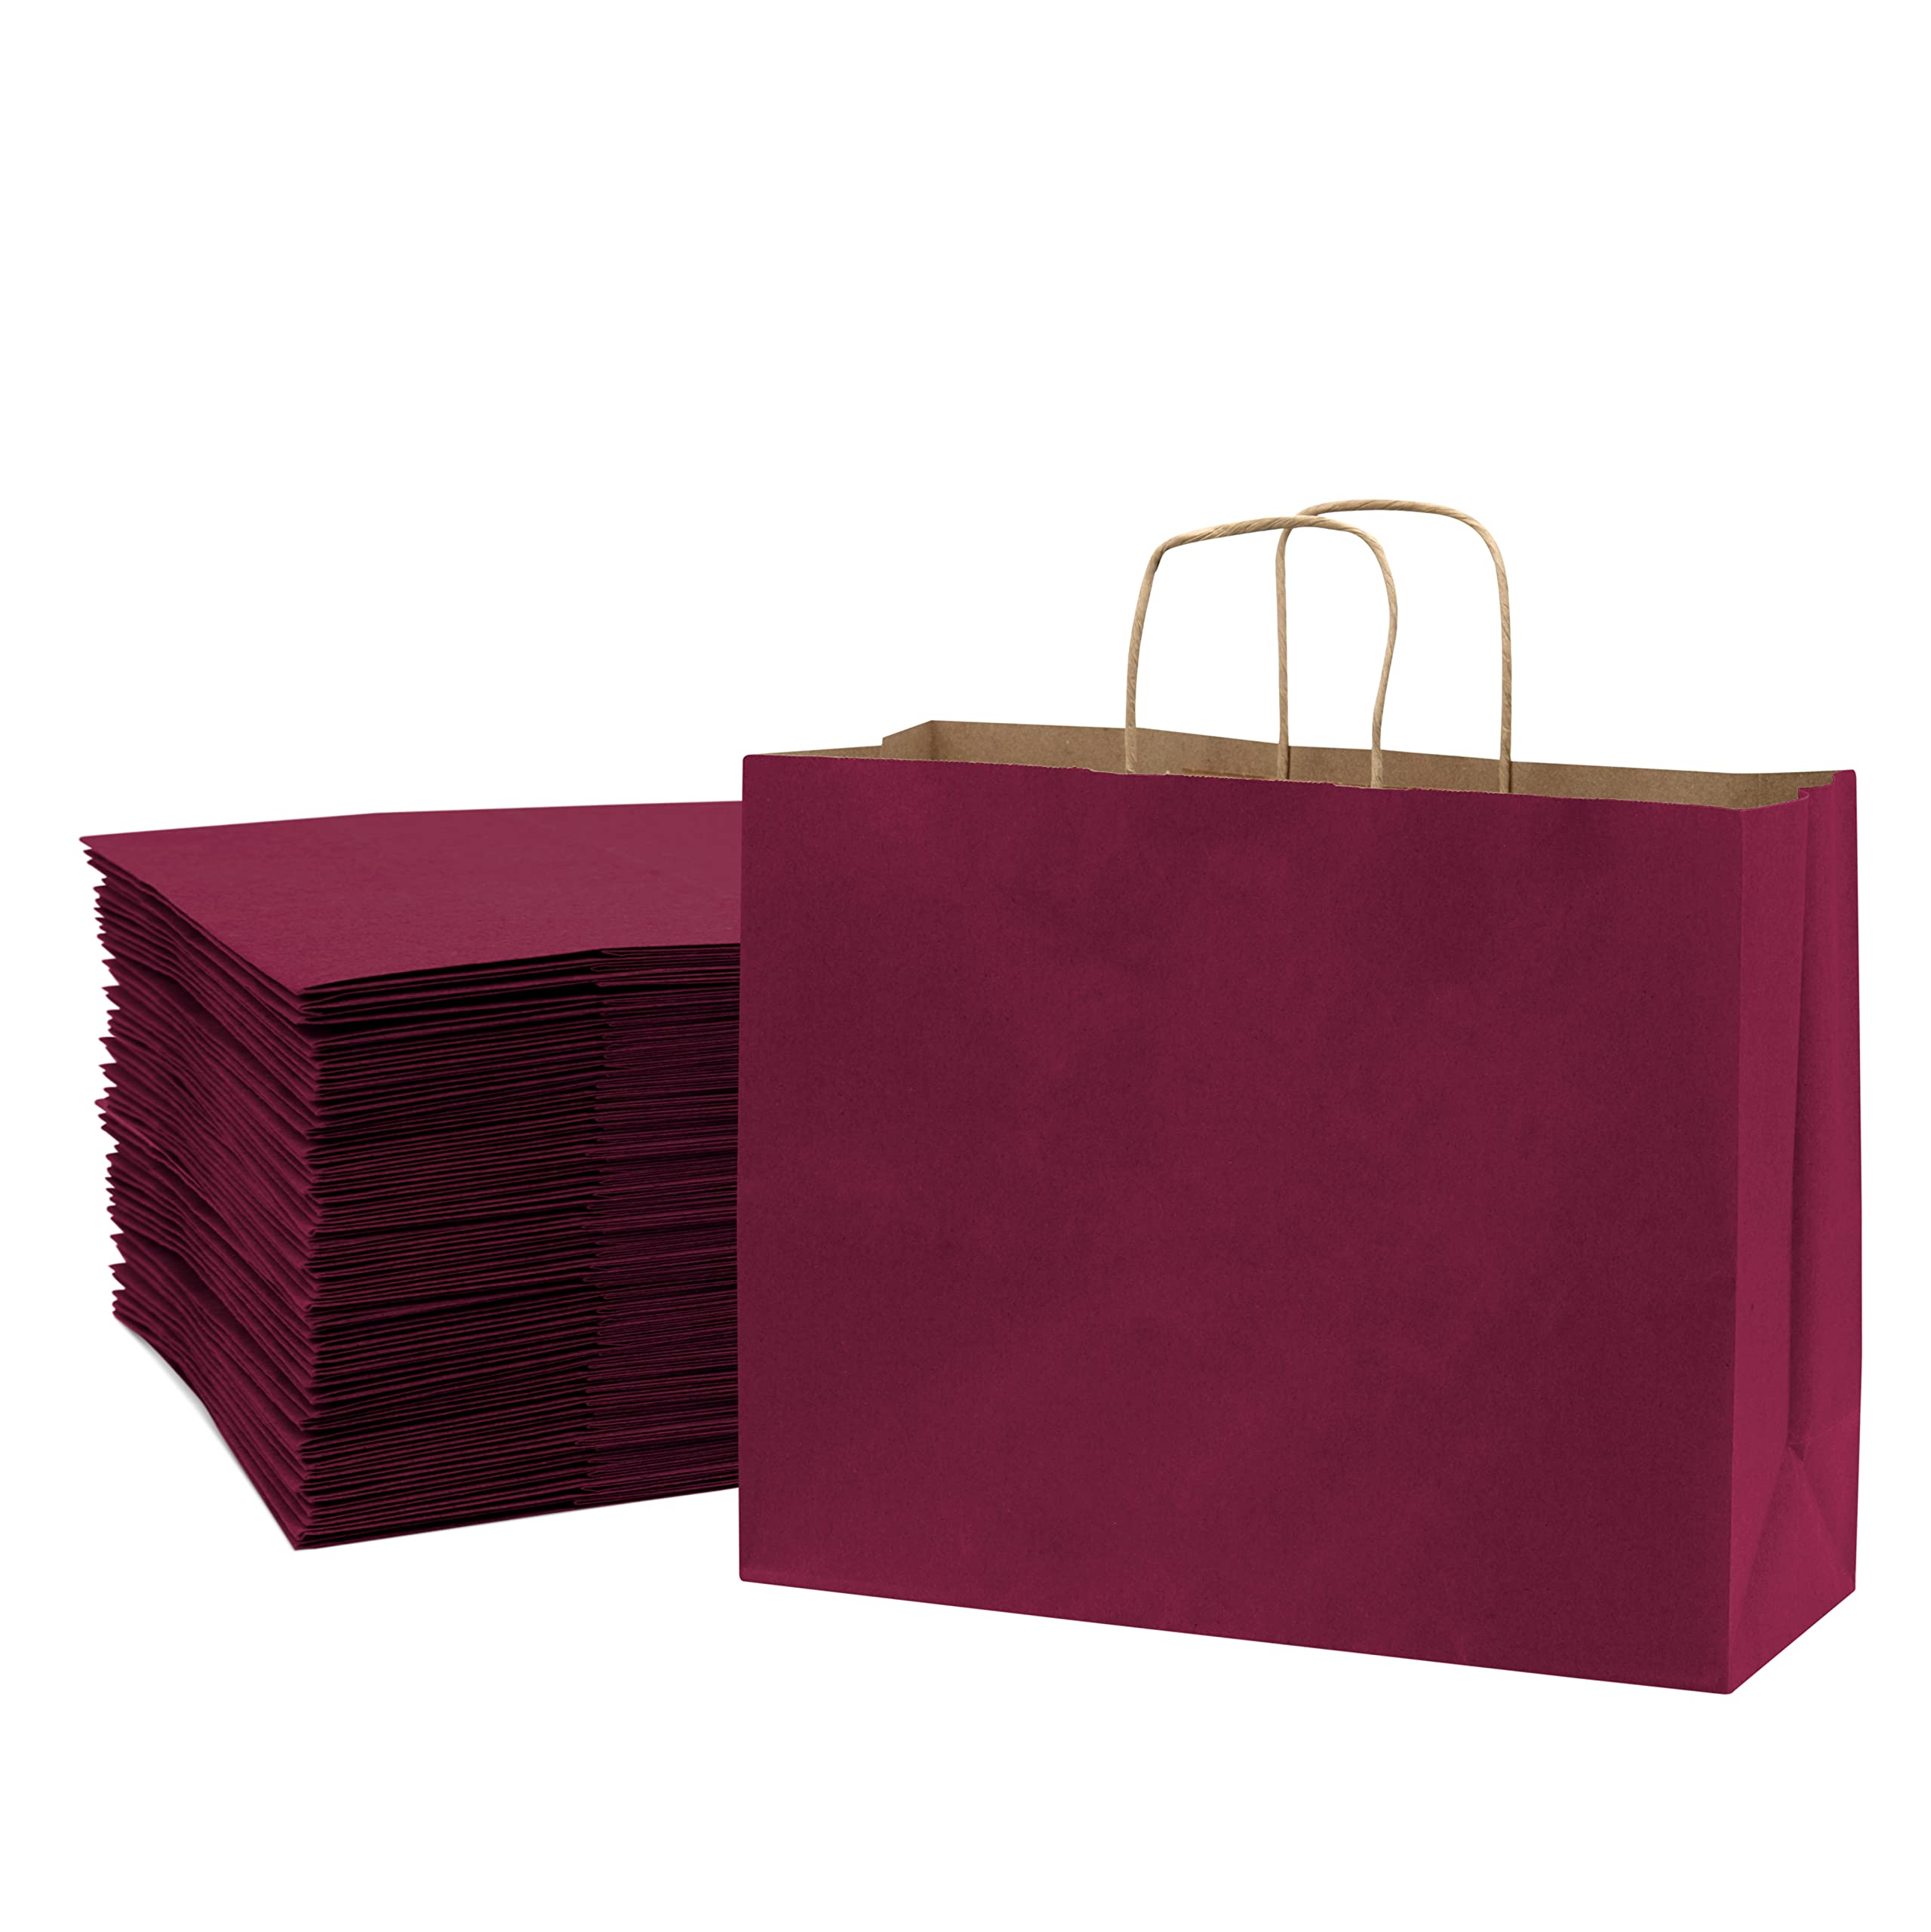 Pink Gift Bags with Handles - 16x6x12 Inch 100 Pack Large Fuchsia Kraft Paper Shopping Bags with Handles for Small Business, Retail & Boutique Use, Merchandise, Birthday & Holiday Gift Wrap, in Bulk